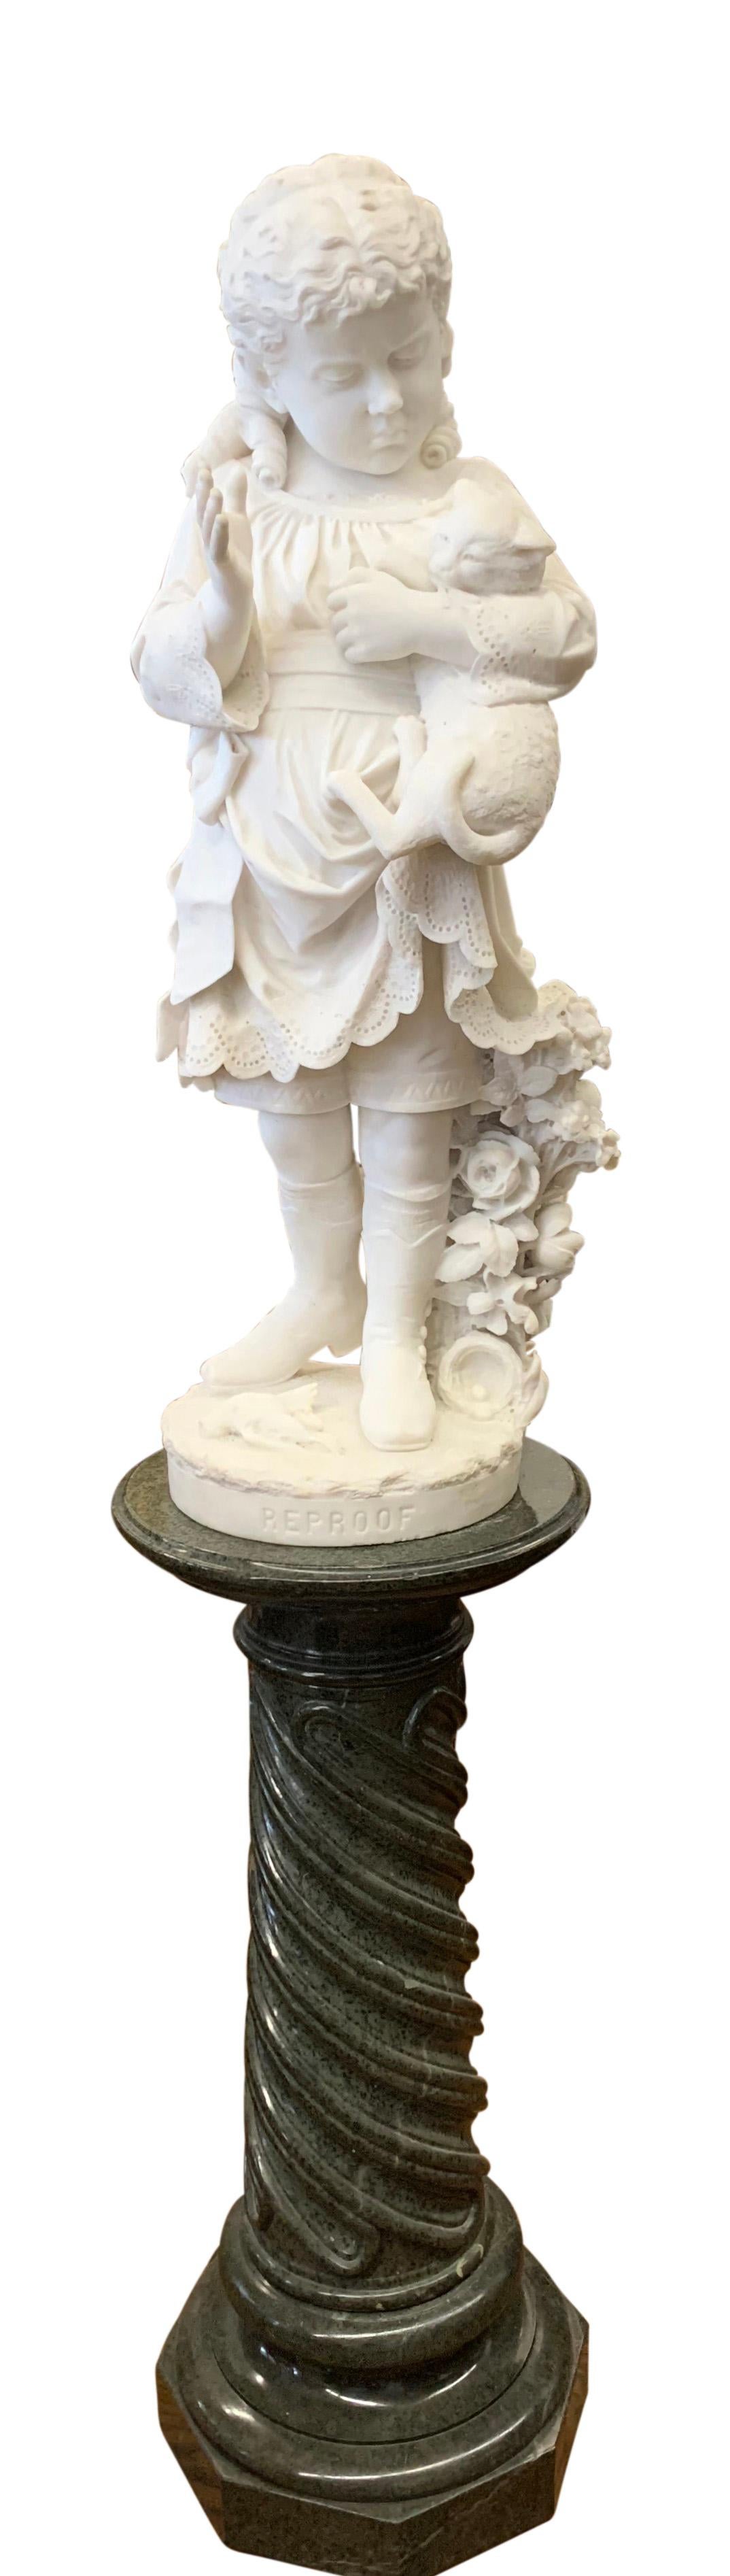 This enchanting museum quality Carrara marble group is the work of Edward Russell Thaxter (born Yarmouth, ME 1857-died Naples, Italy 1881). 

The sculpture depicts a young girl sternly scolds her cat, who has just attacked a bird's nest. She